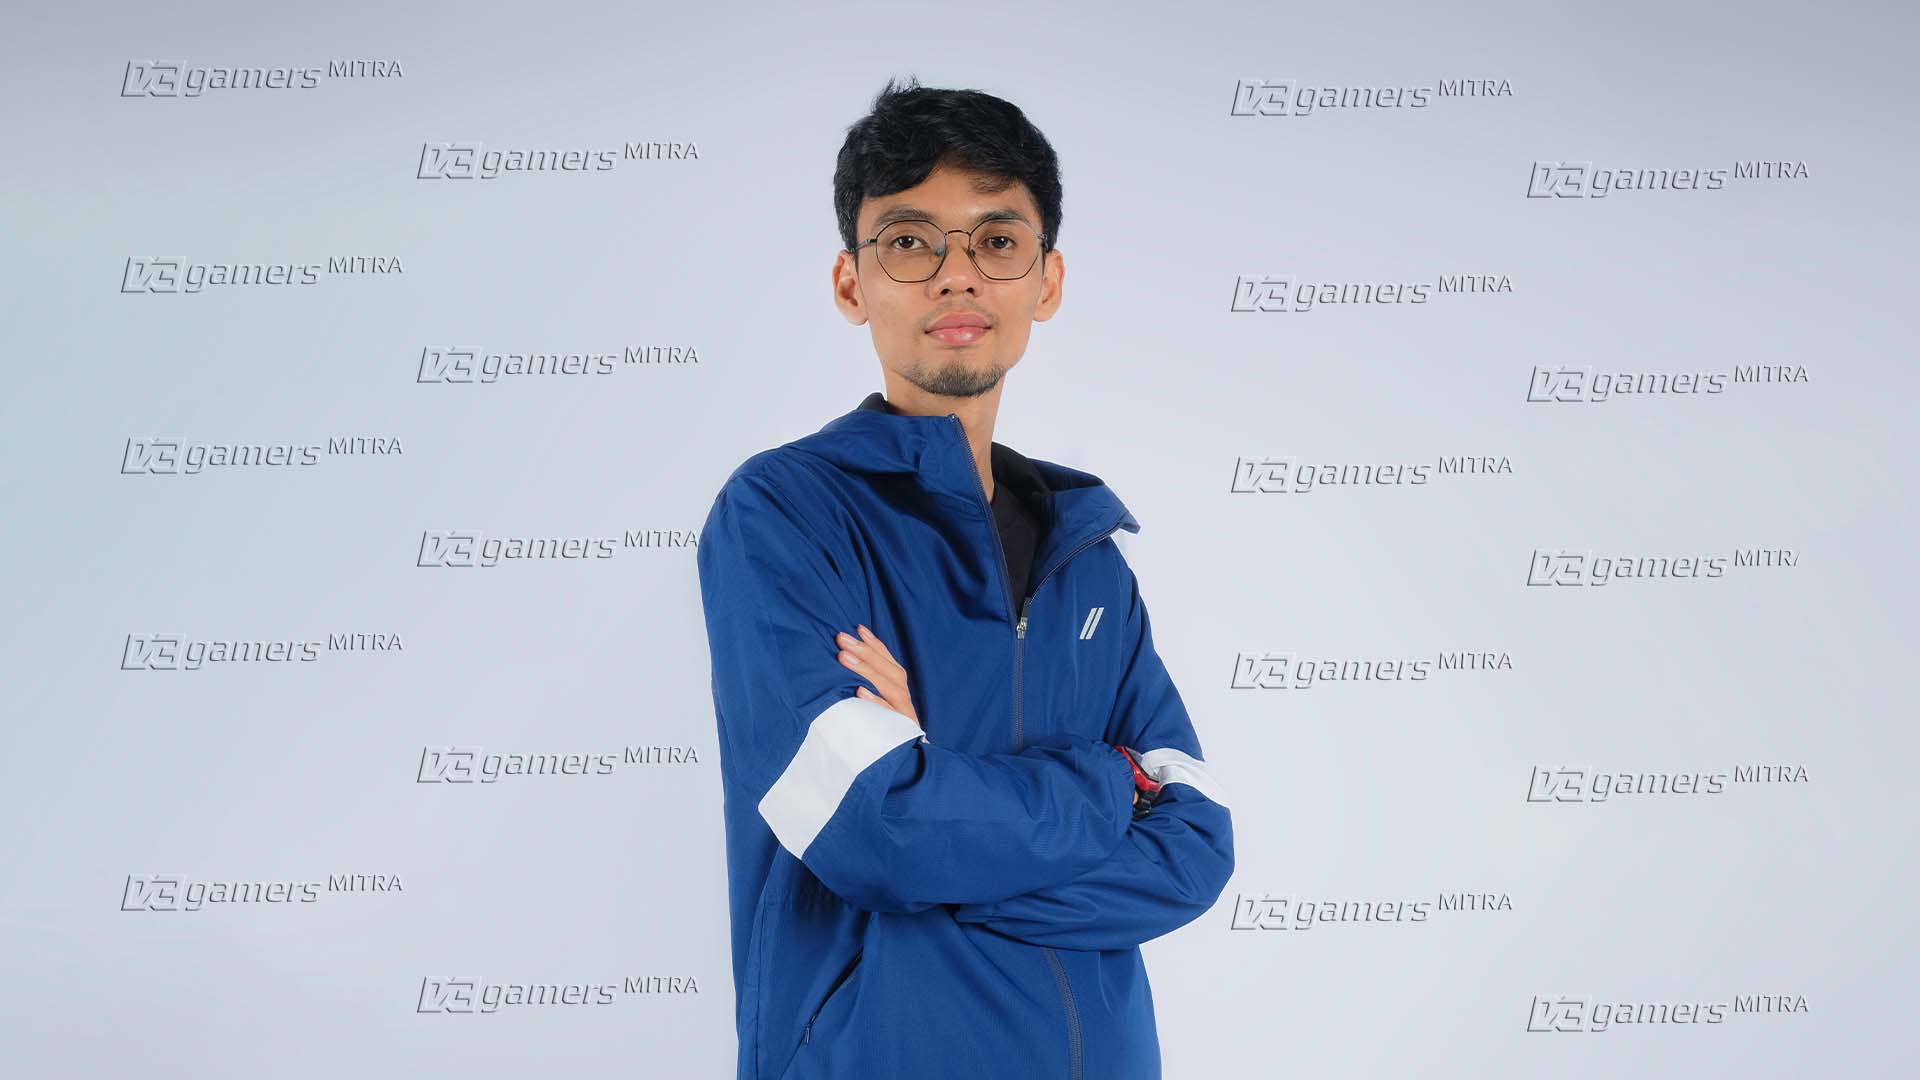   Chief Commercial Officer VCGamers, Ibnu Anggara. <b>Source: VCGamers</b>